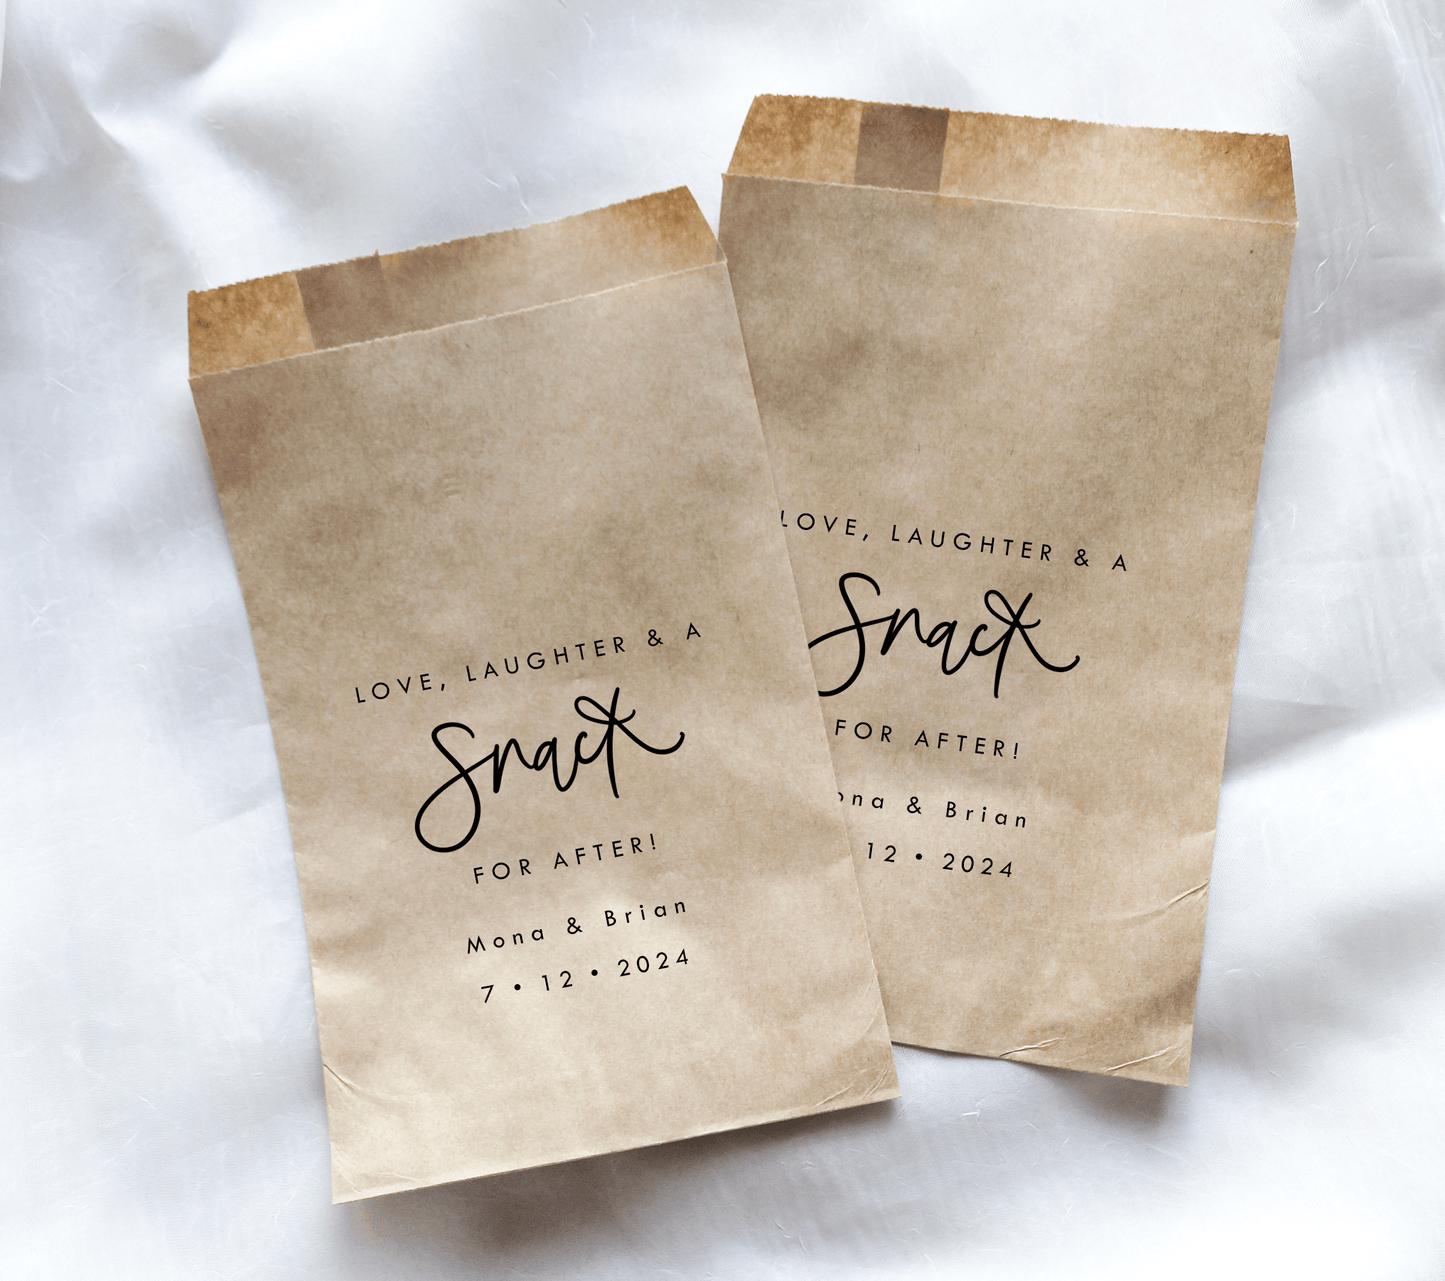 Love, Laughter, and a Snack for After! Favor Bags - Plum Grove Design